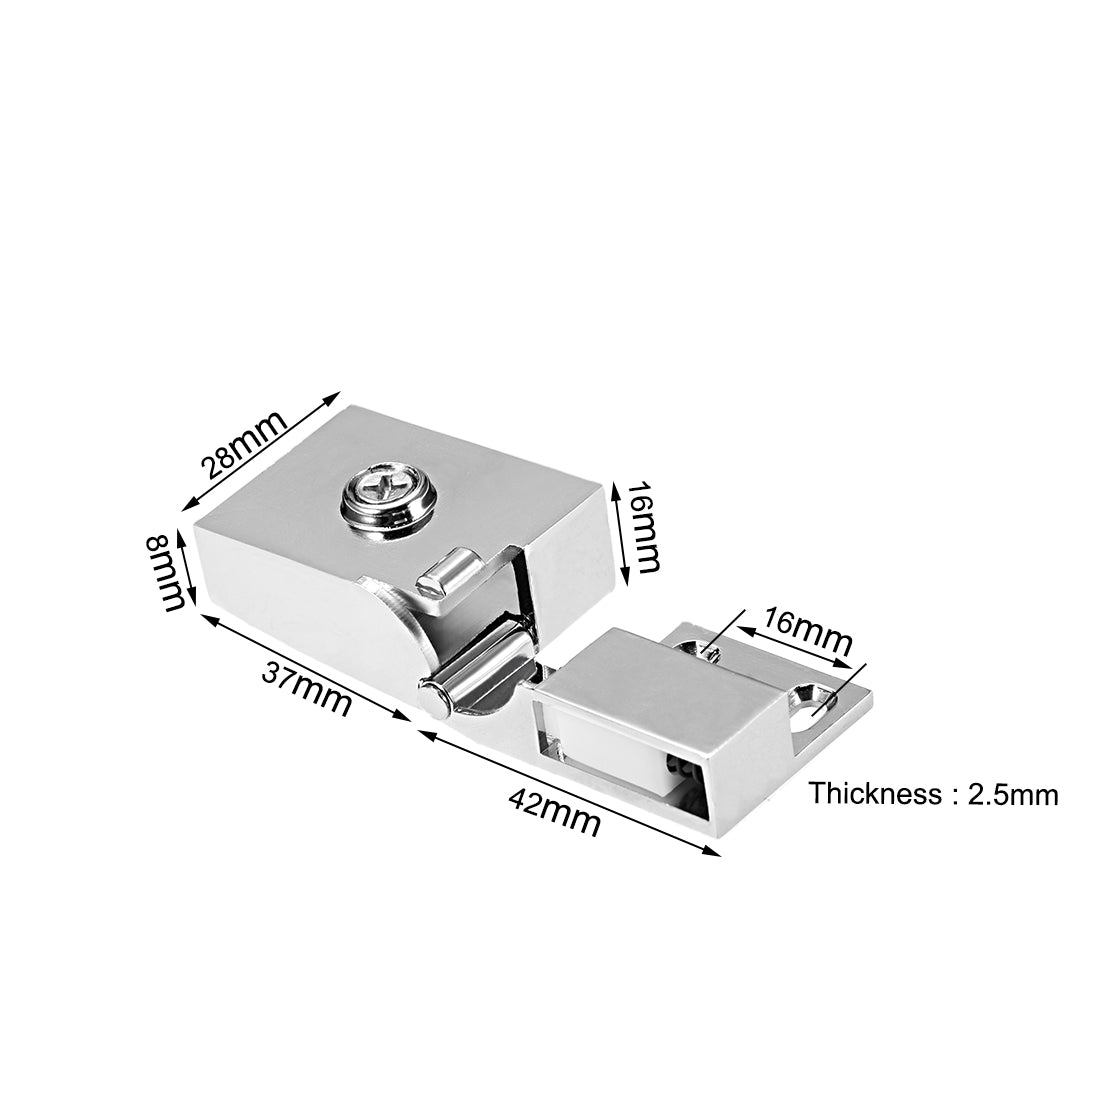 uxcell Uxcell 1Pair Glass Door Hinge Cupboard Showcase Cabinet Door Hinge Glass Clamp , Zinc Alloy , for 3-5mm Thickness